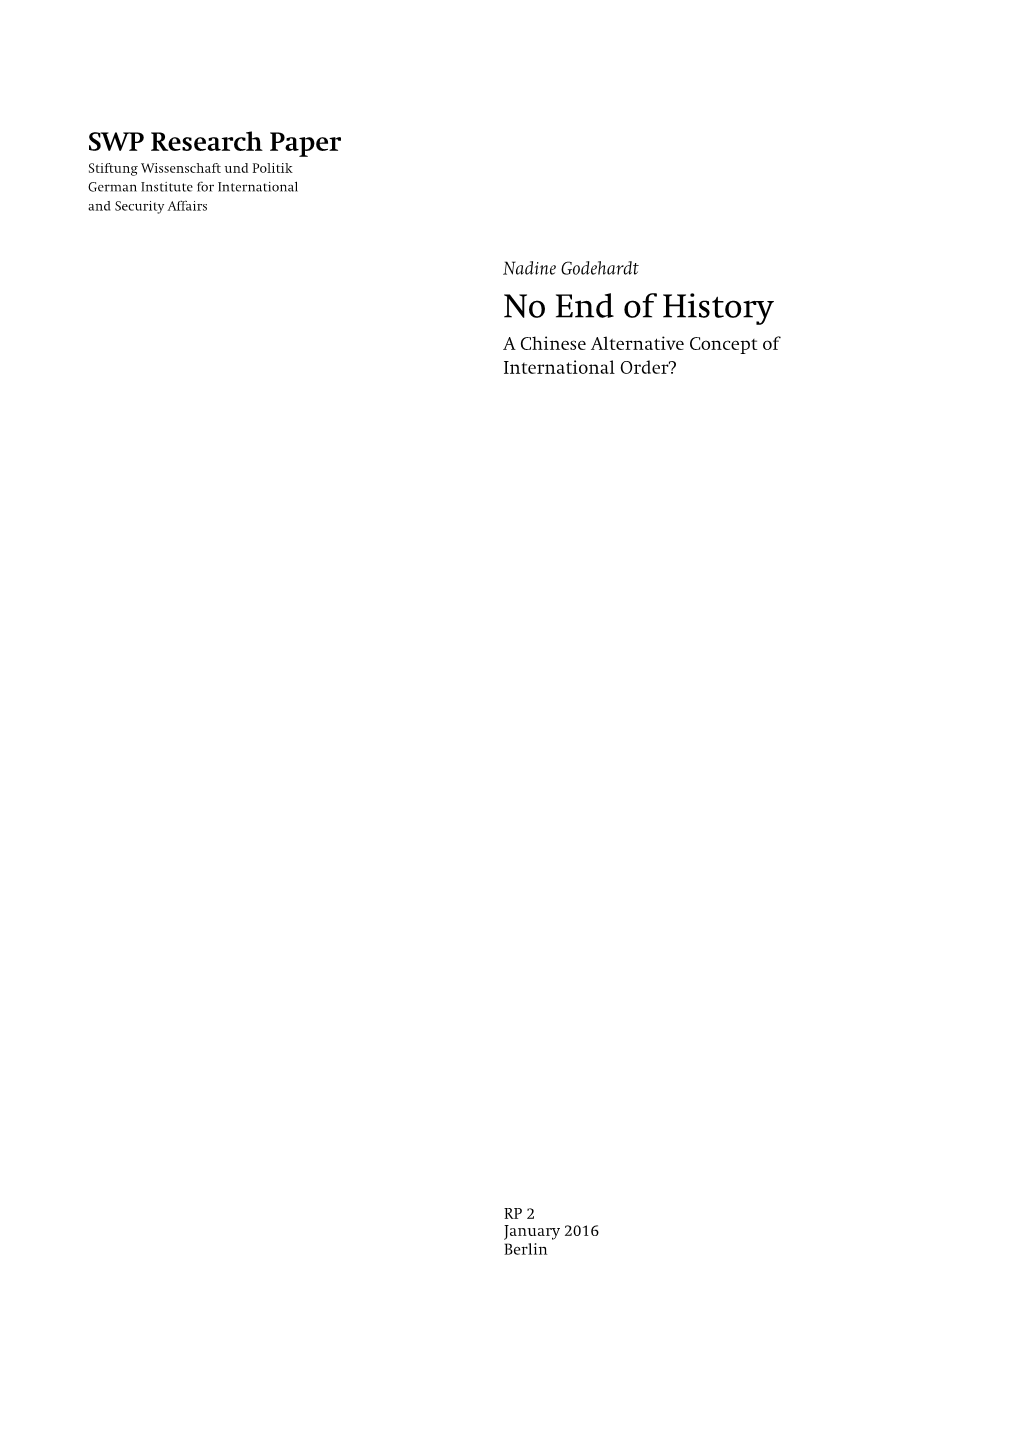 No End of History. a Chinese Alternative Concept of International